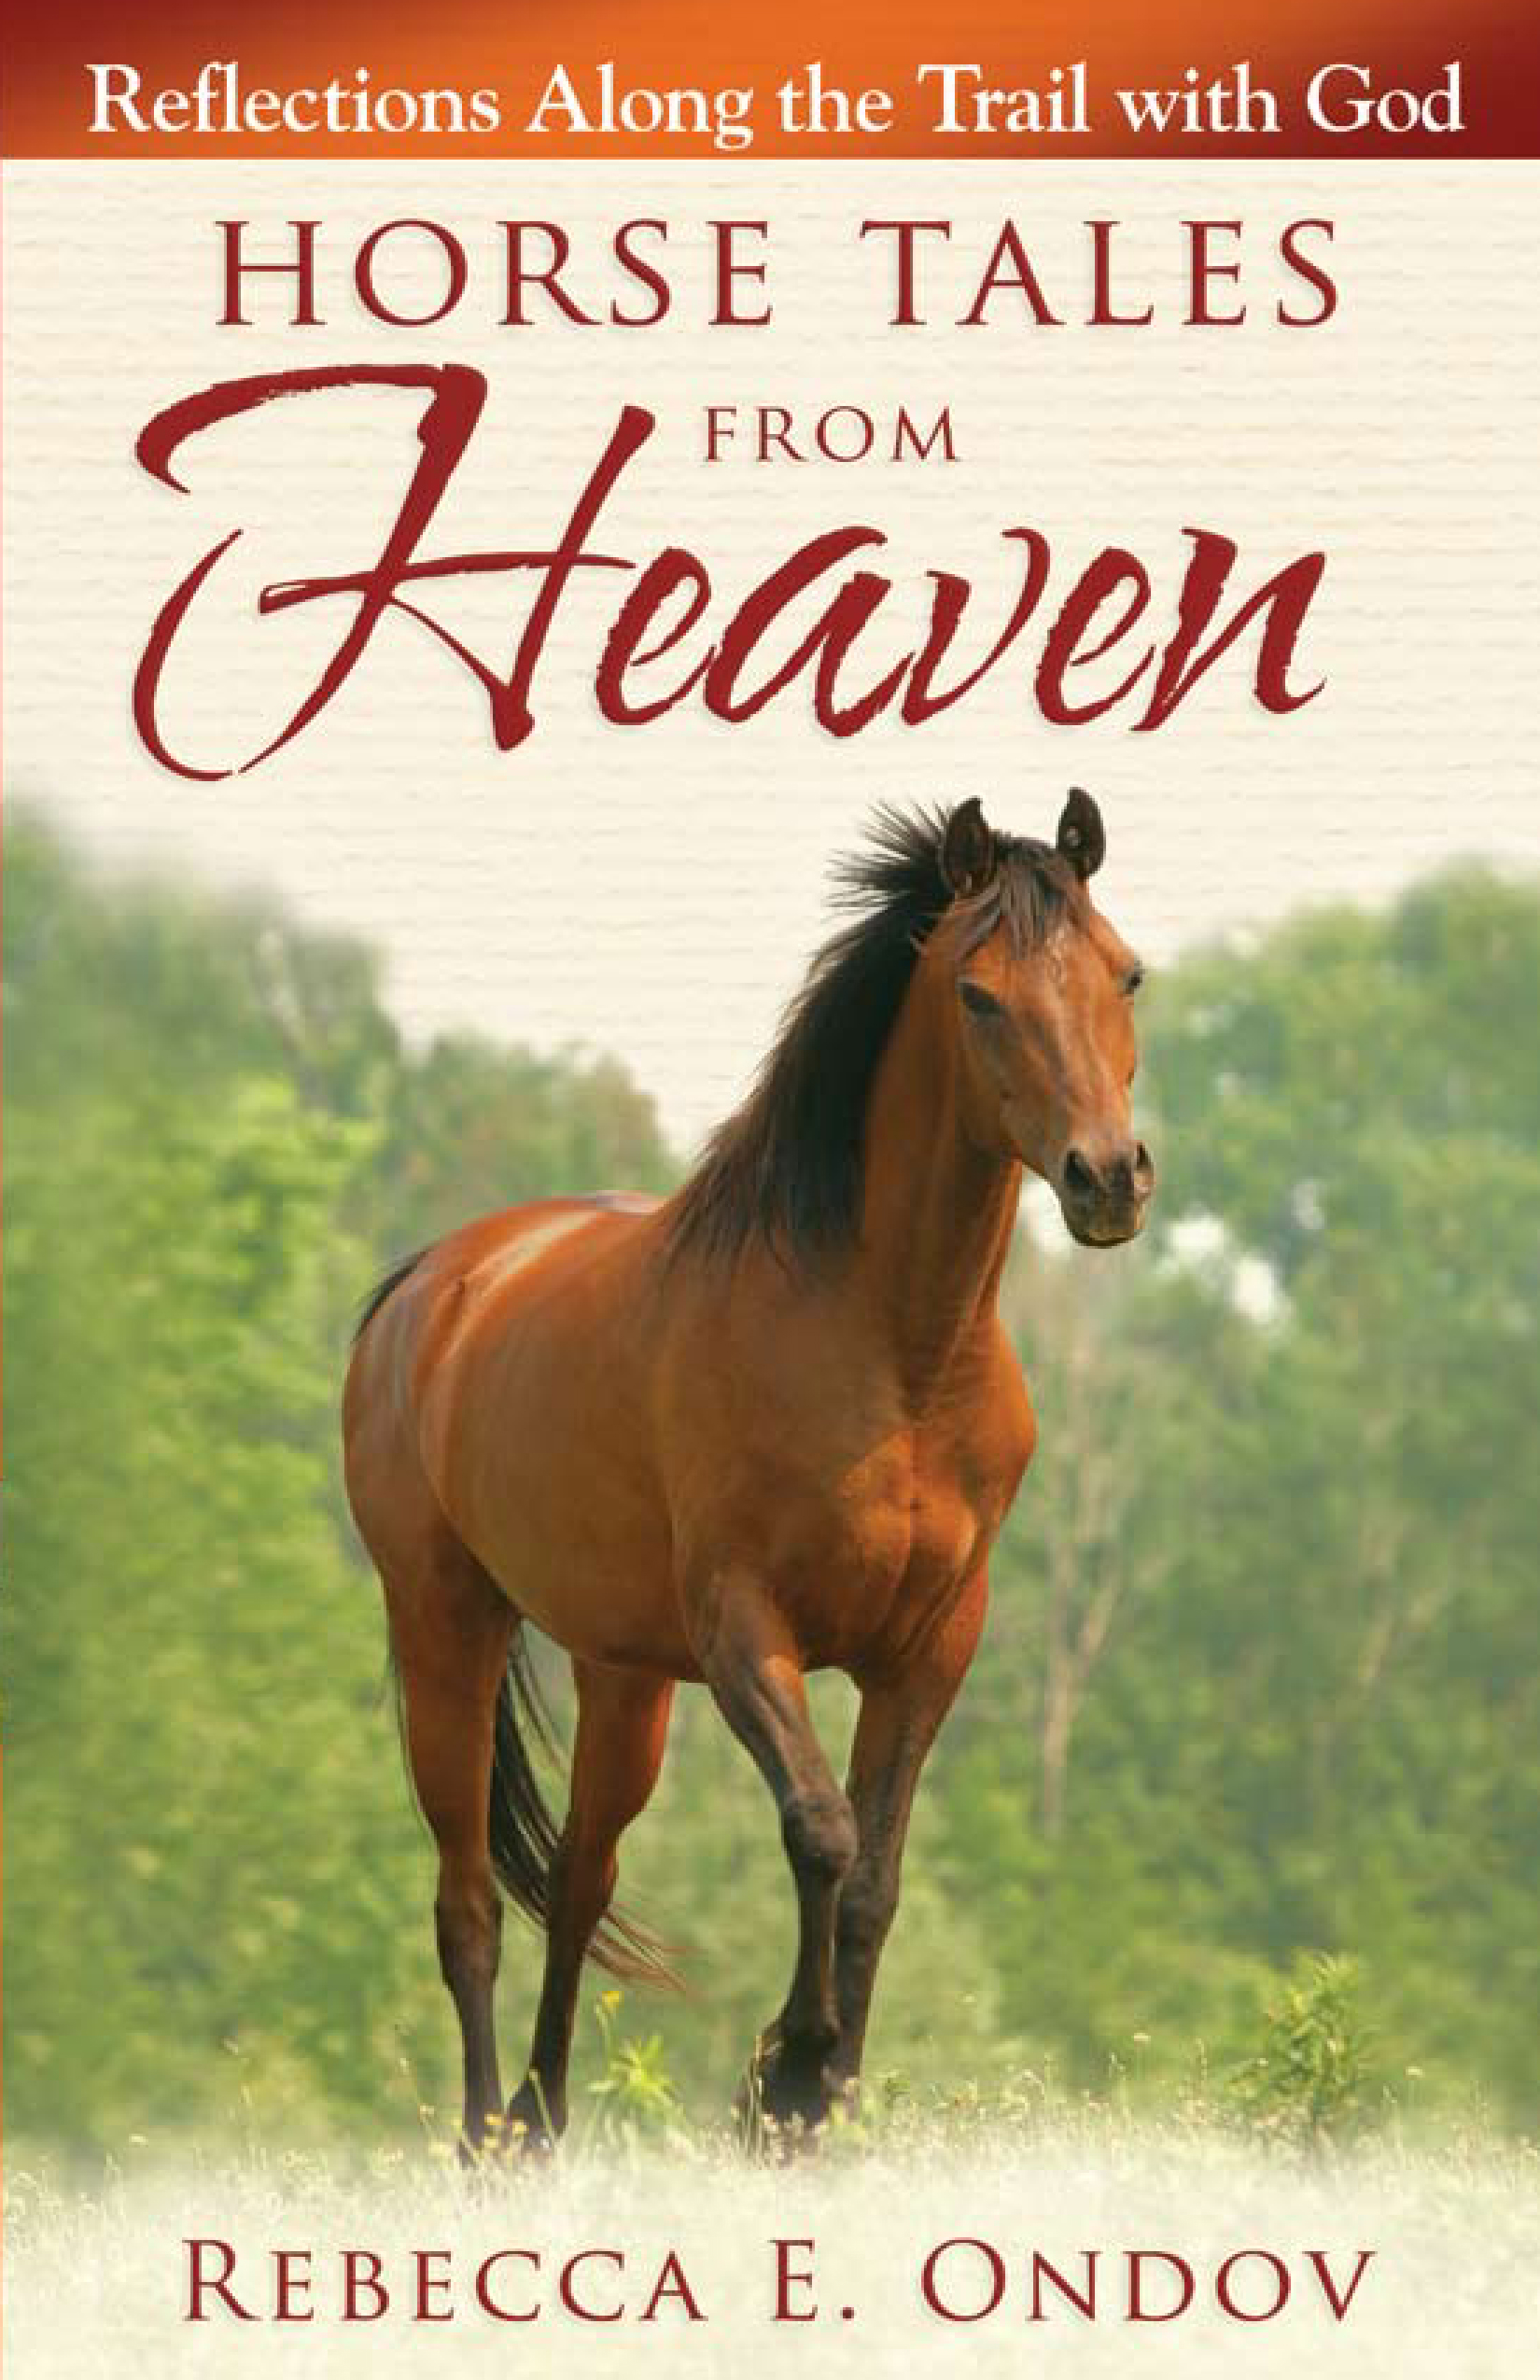 Horse Tales from Heaven